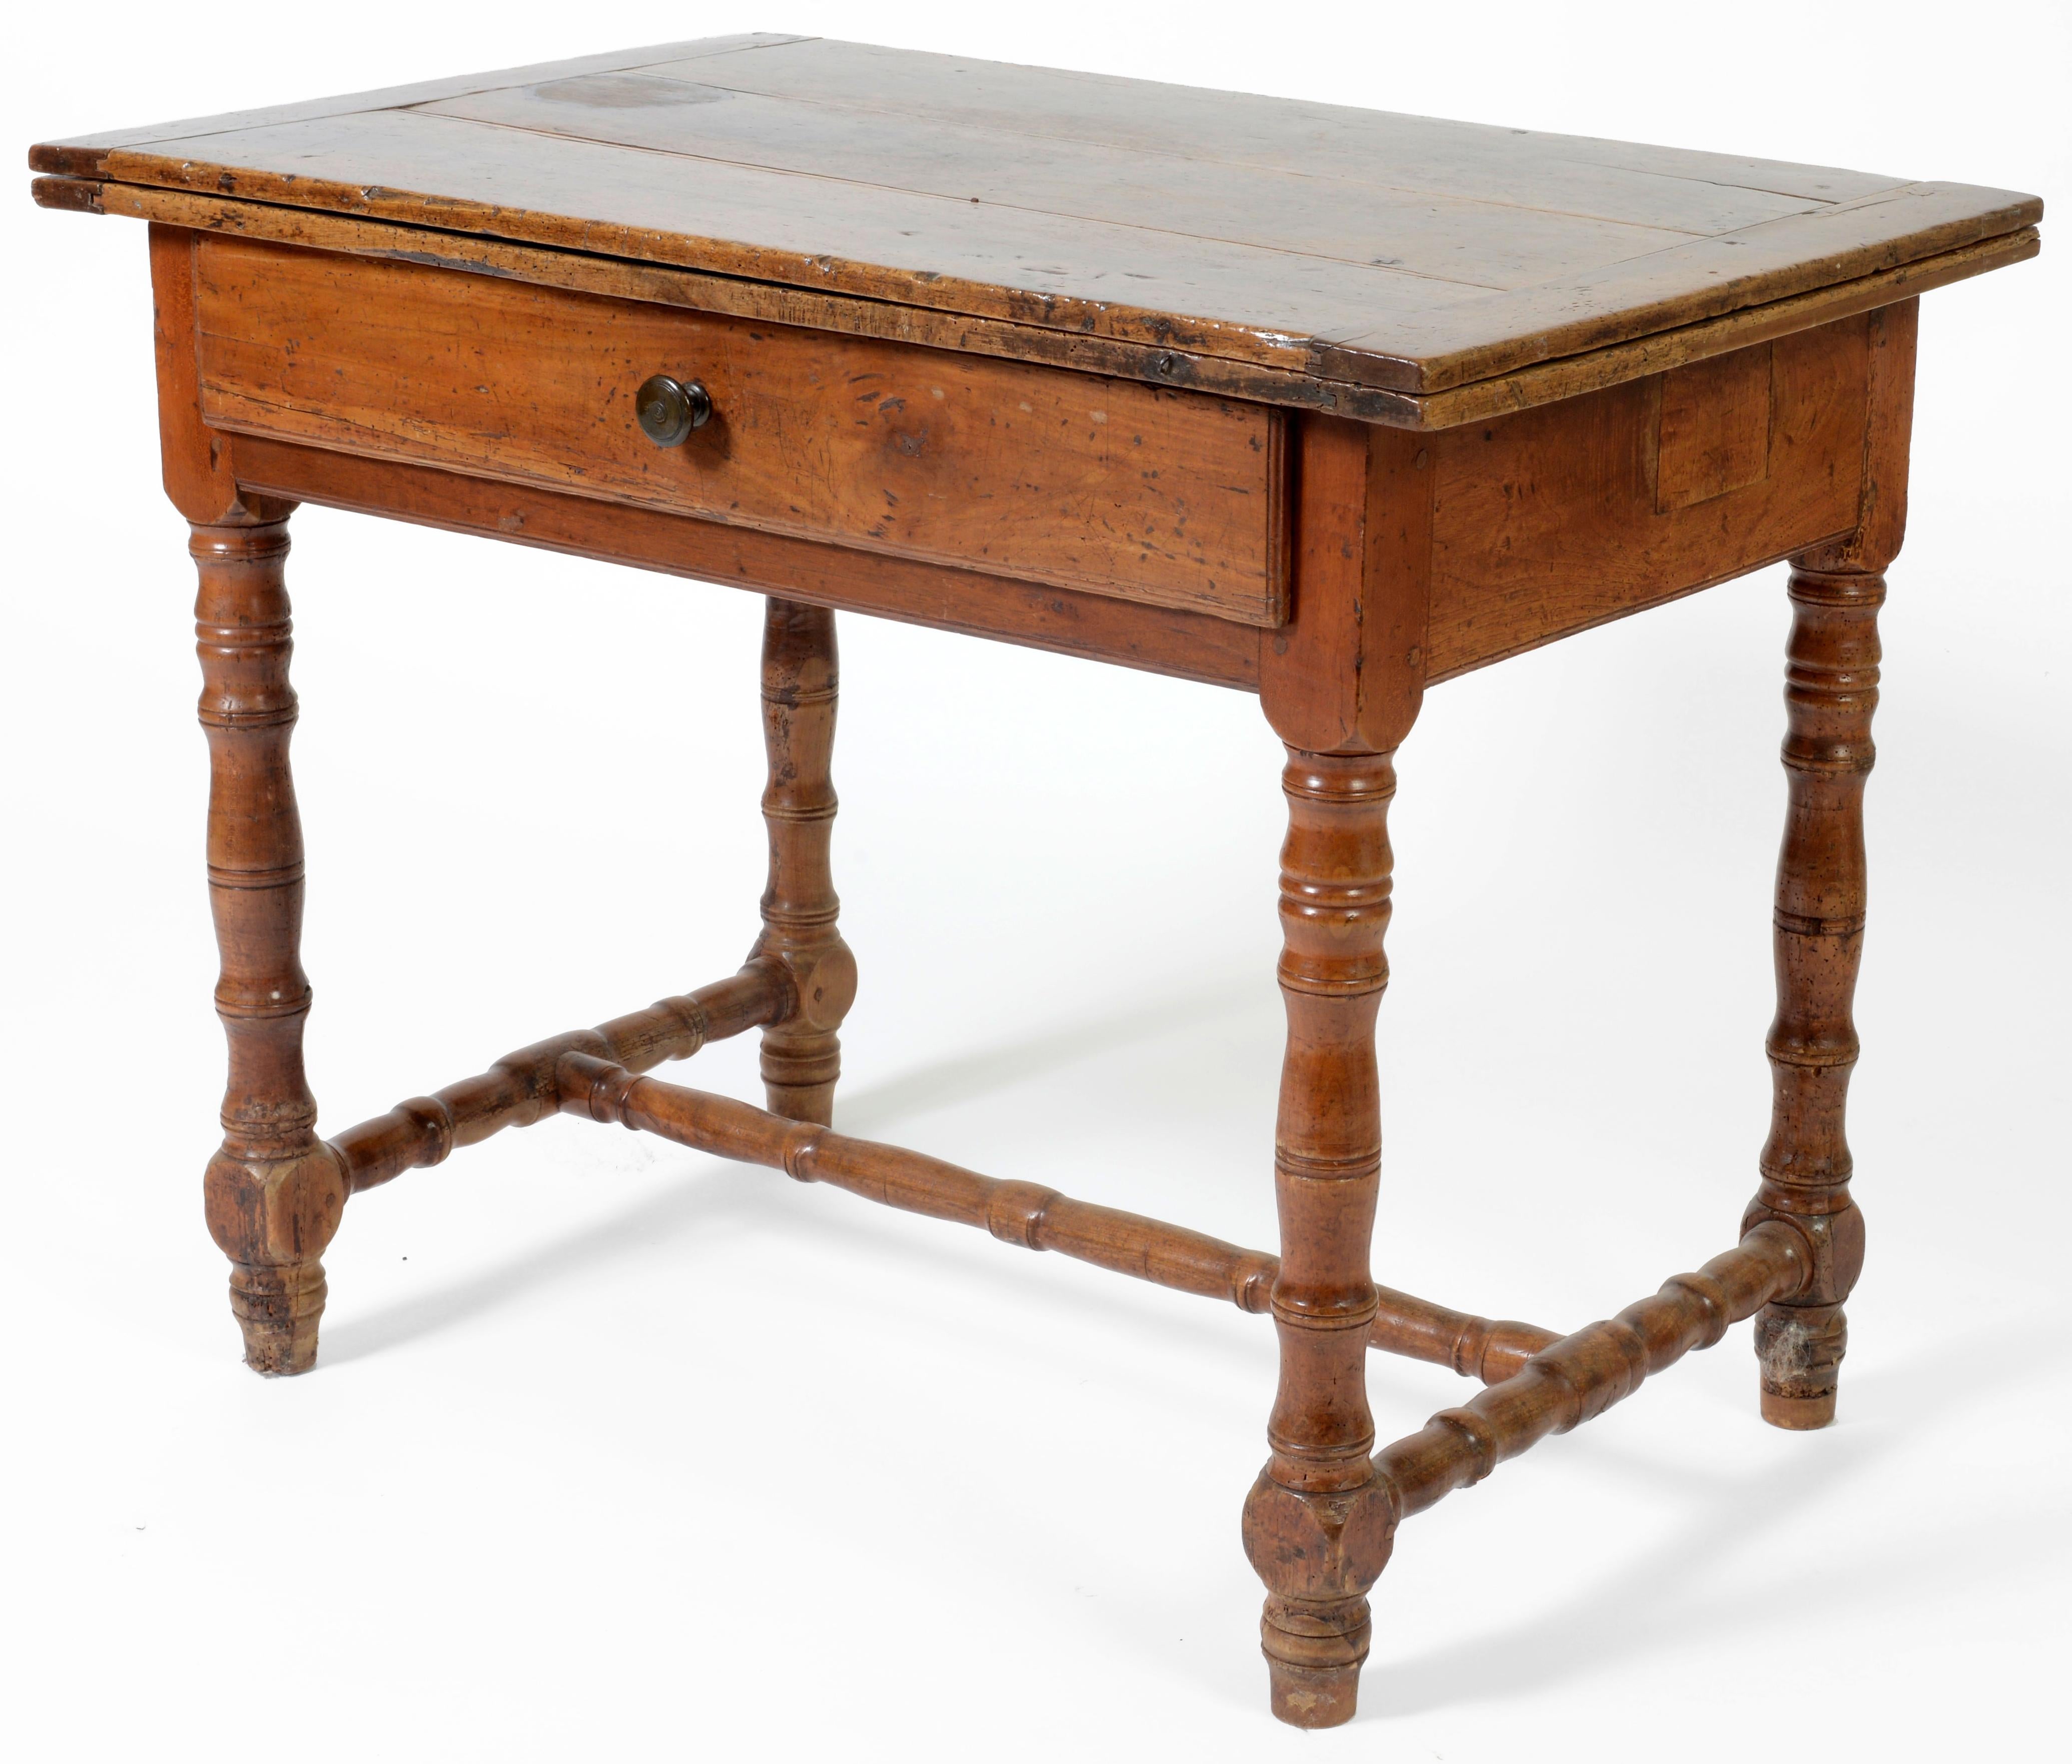 Italian Baroque Walnut Writing Table with Hinged Top, c1700 In Good Condition For Sale In valatie, NY